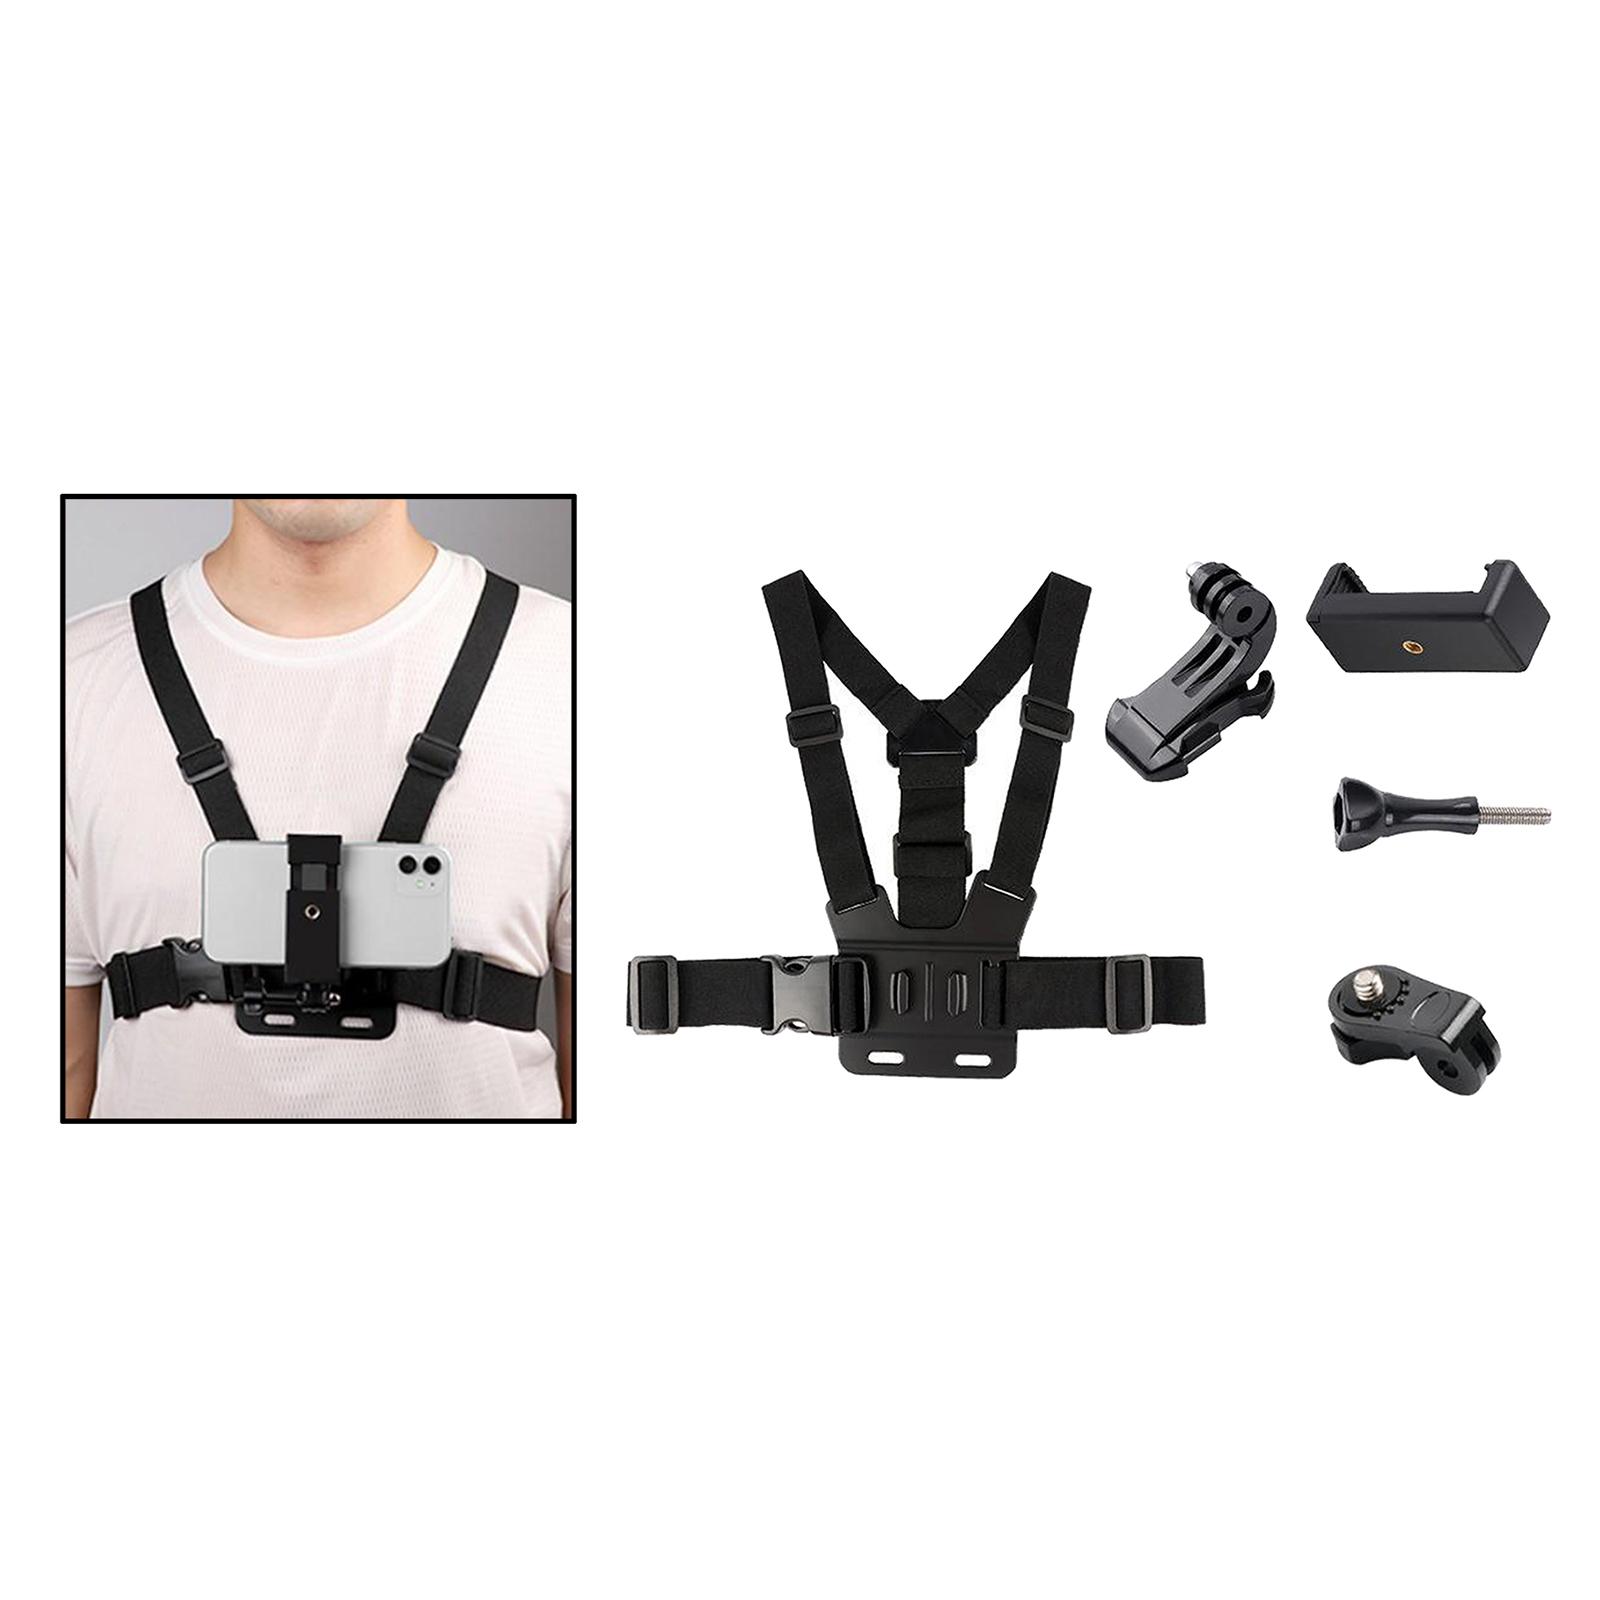 Chest Mount Harness Strap Holder with Phone Clip for Mobile Phones